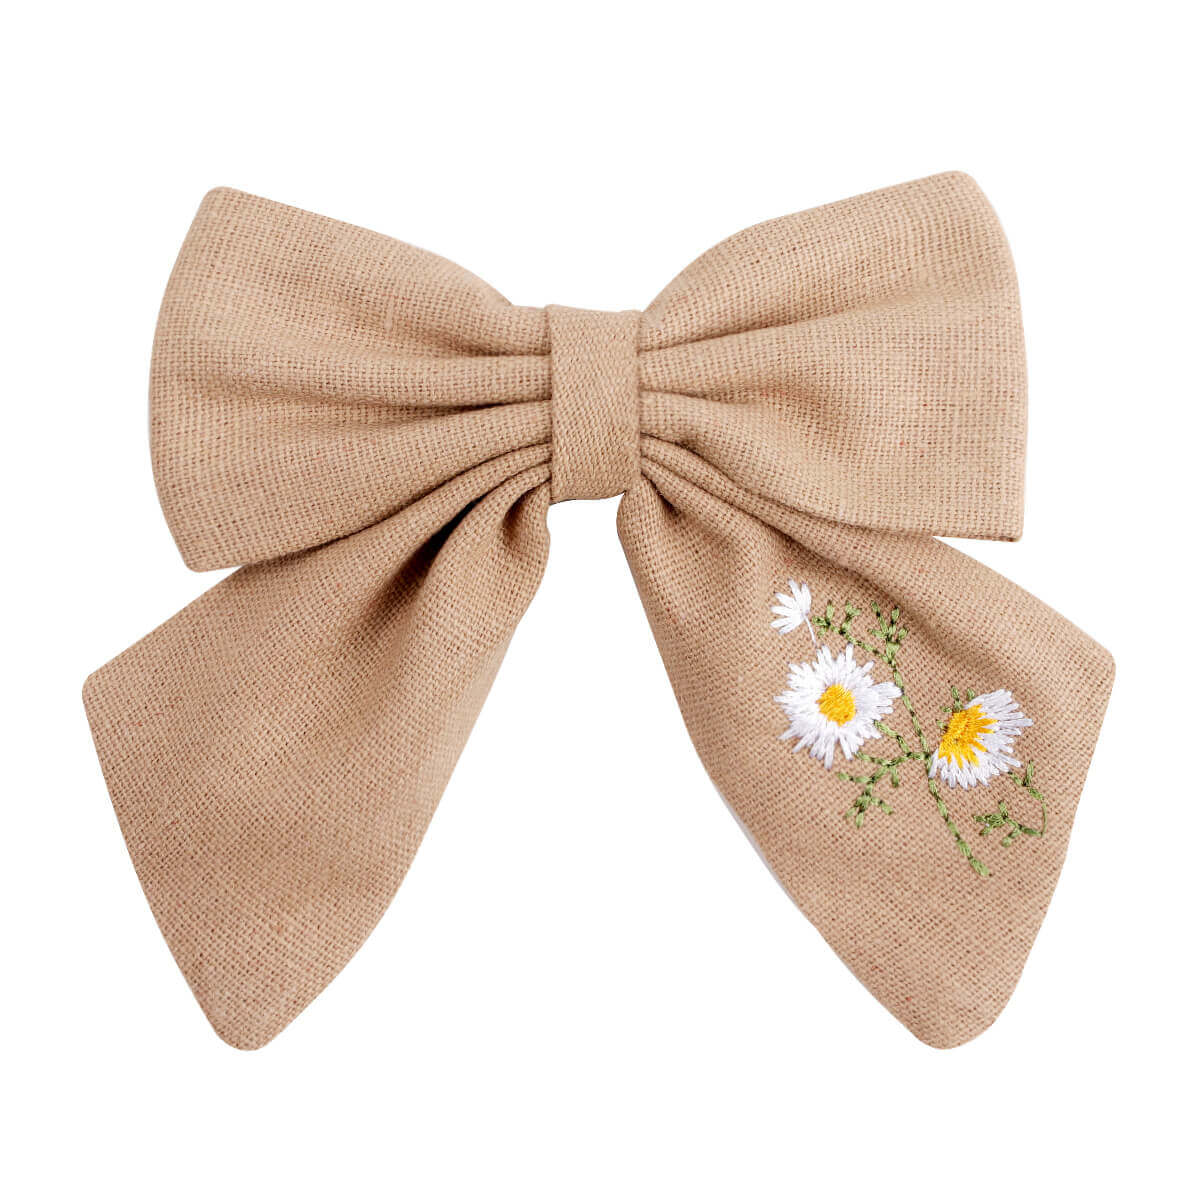 Floral GG Fashion Hairbow | Buy Hair Bow from BeChicBabyBoutique